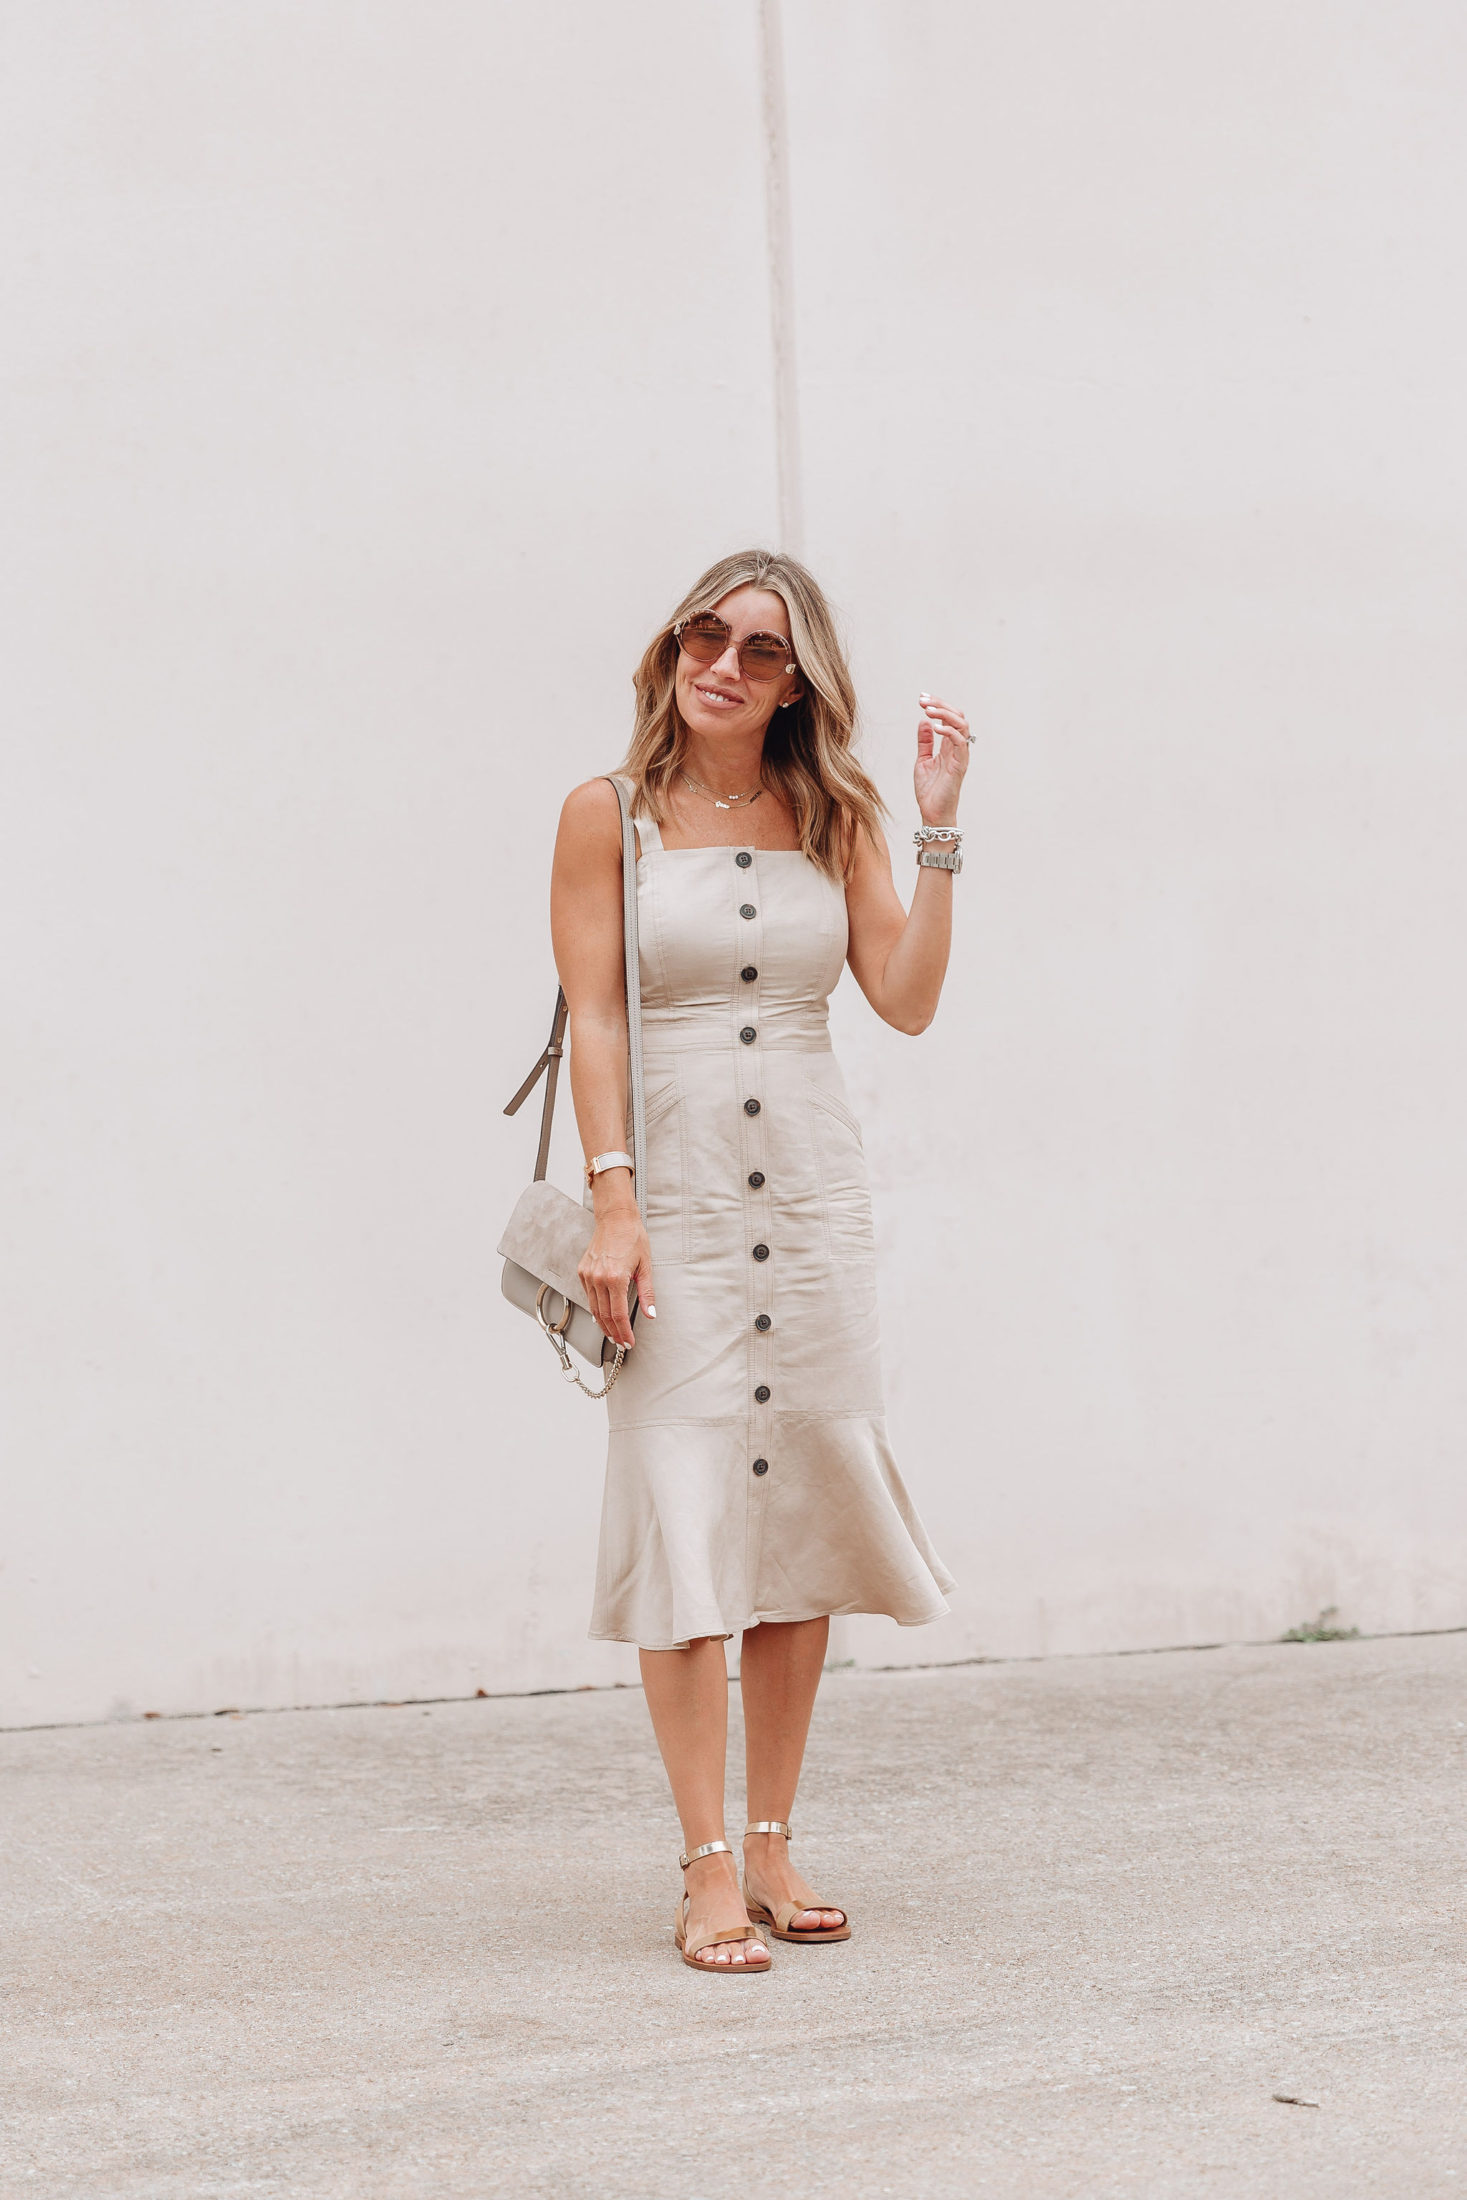 2 Easy Outfits To Kick Off Summer The Real Fashionista